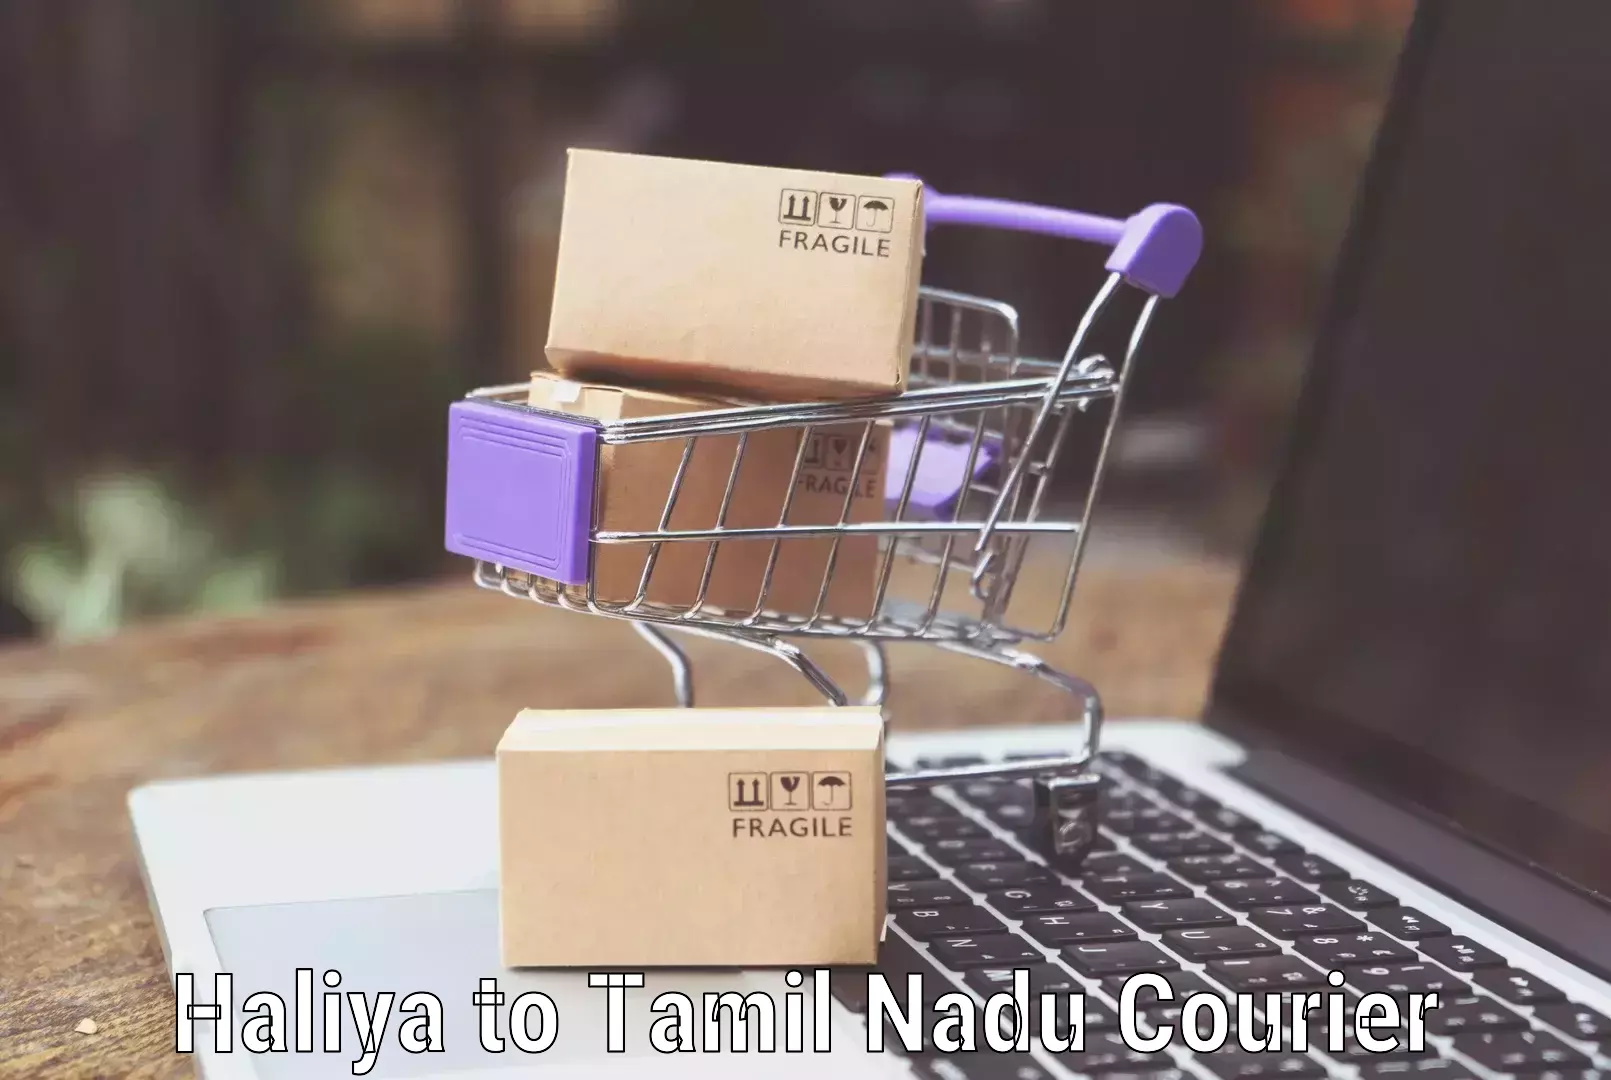 Same day luggage service Haliya to Vellore Institute of Technology